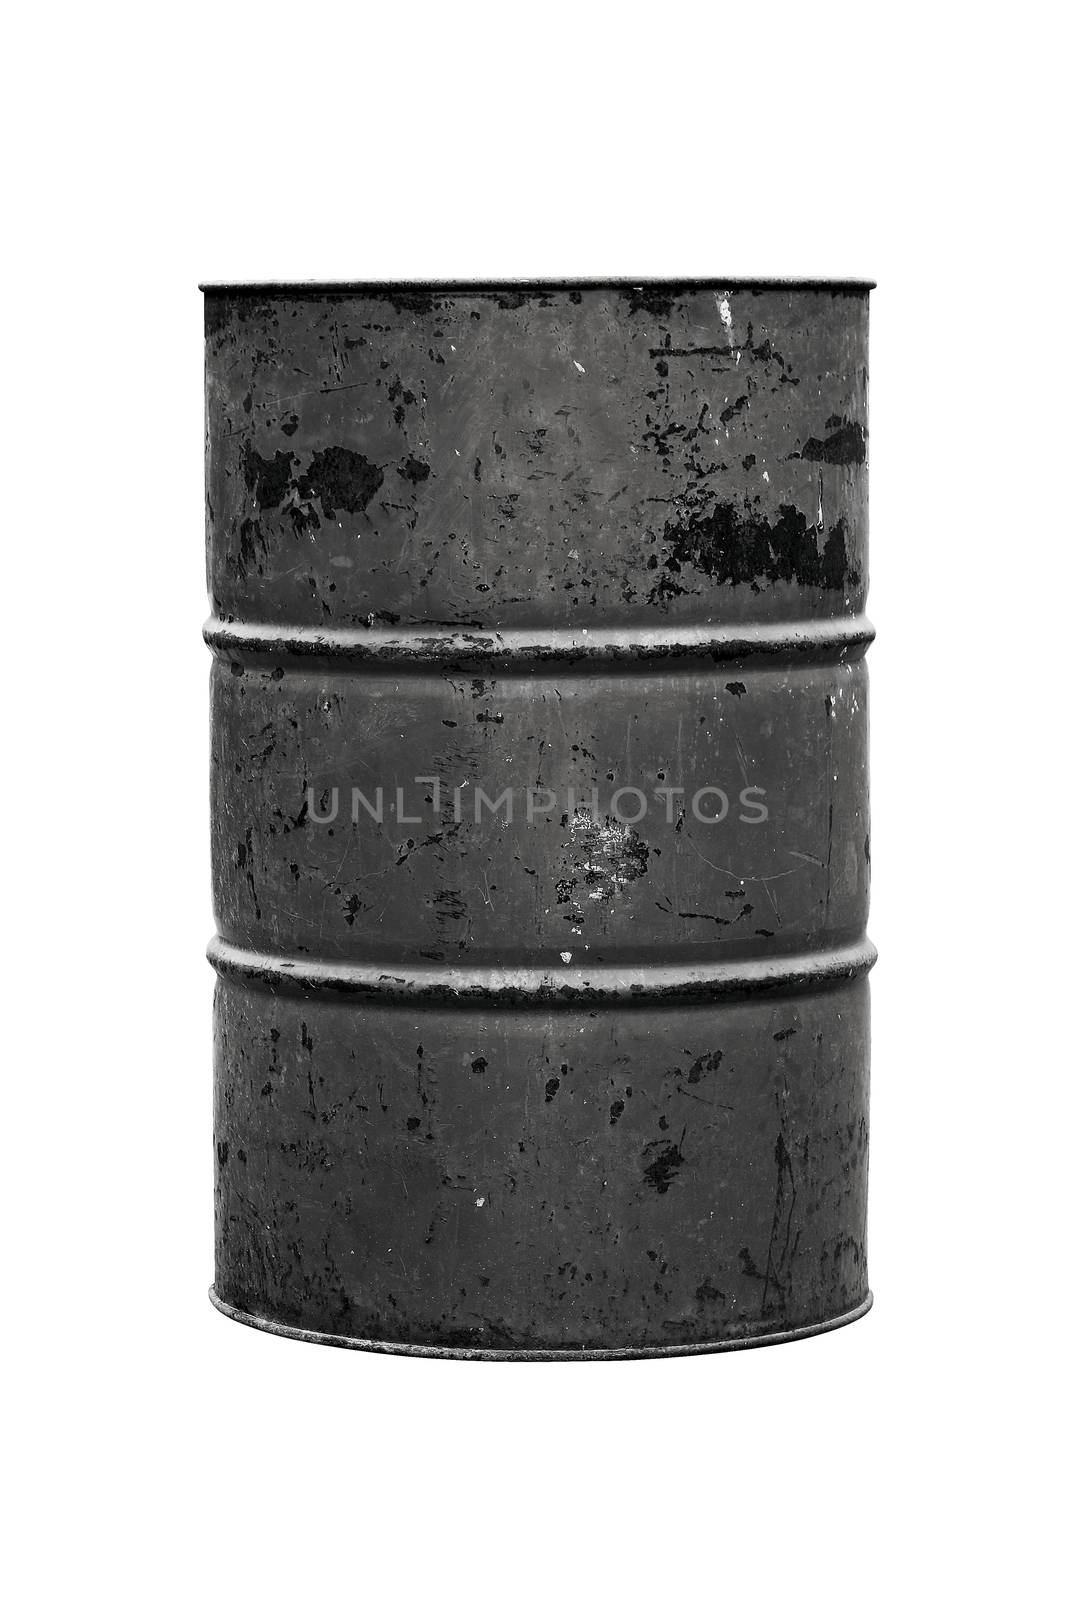 Barrel Oil black or dark Old isolated on background white